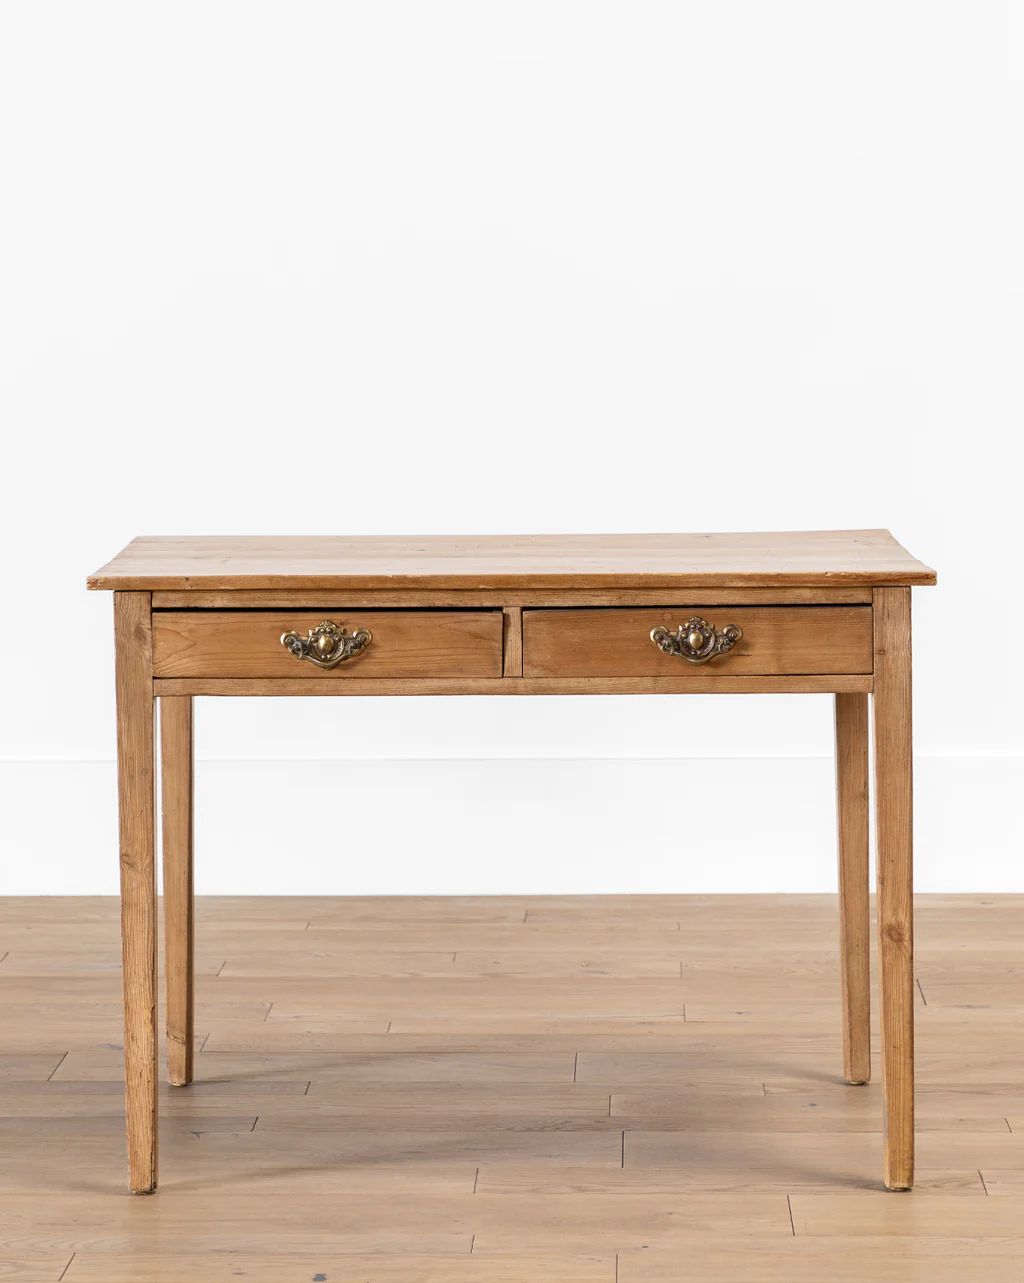 Vintage Wooden Writing Desk | McGee & Co.